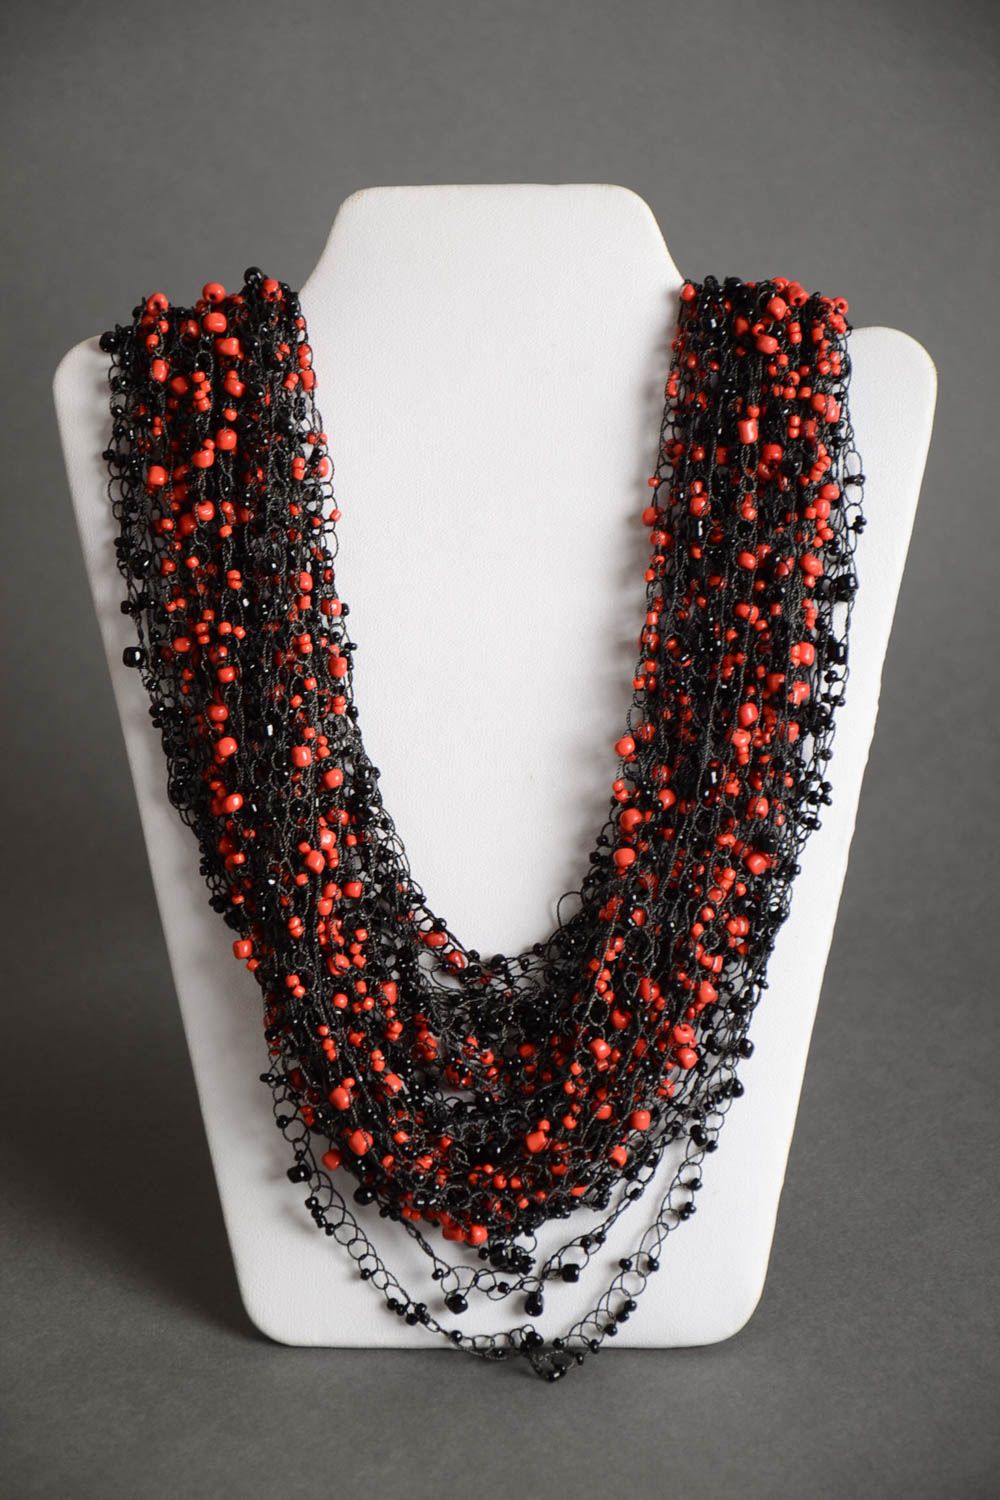 Handmade volume airy expressive necklace crocheted of red and black Czech beads photo 2